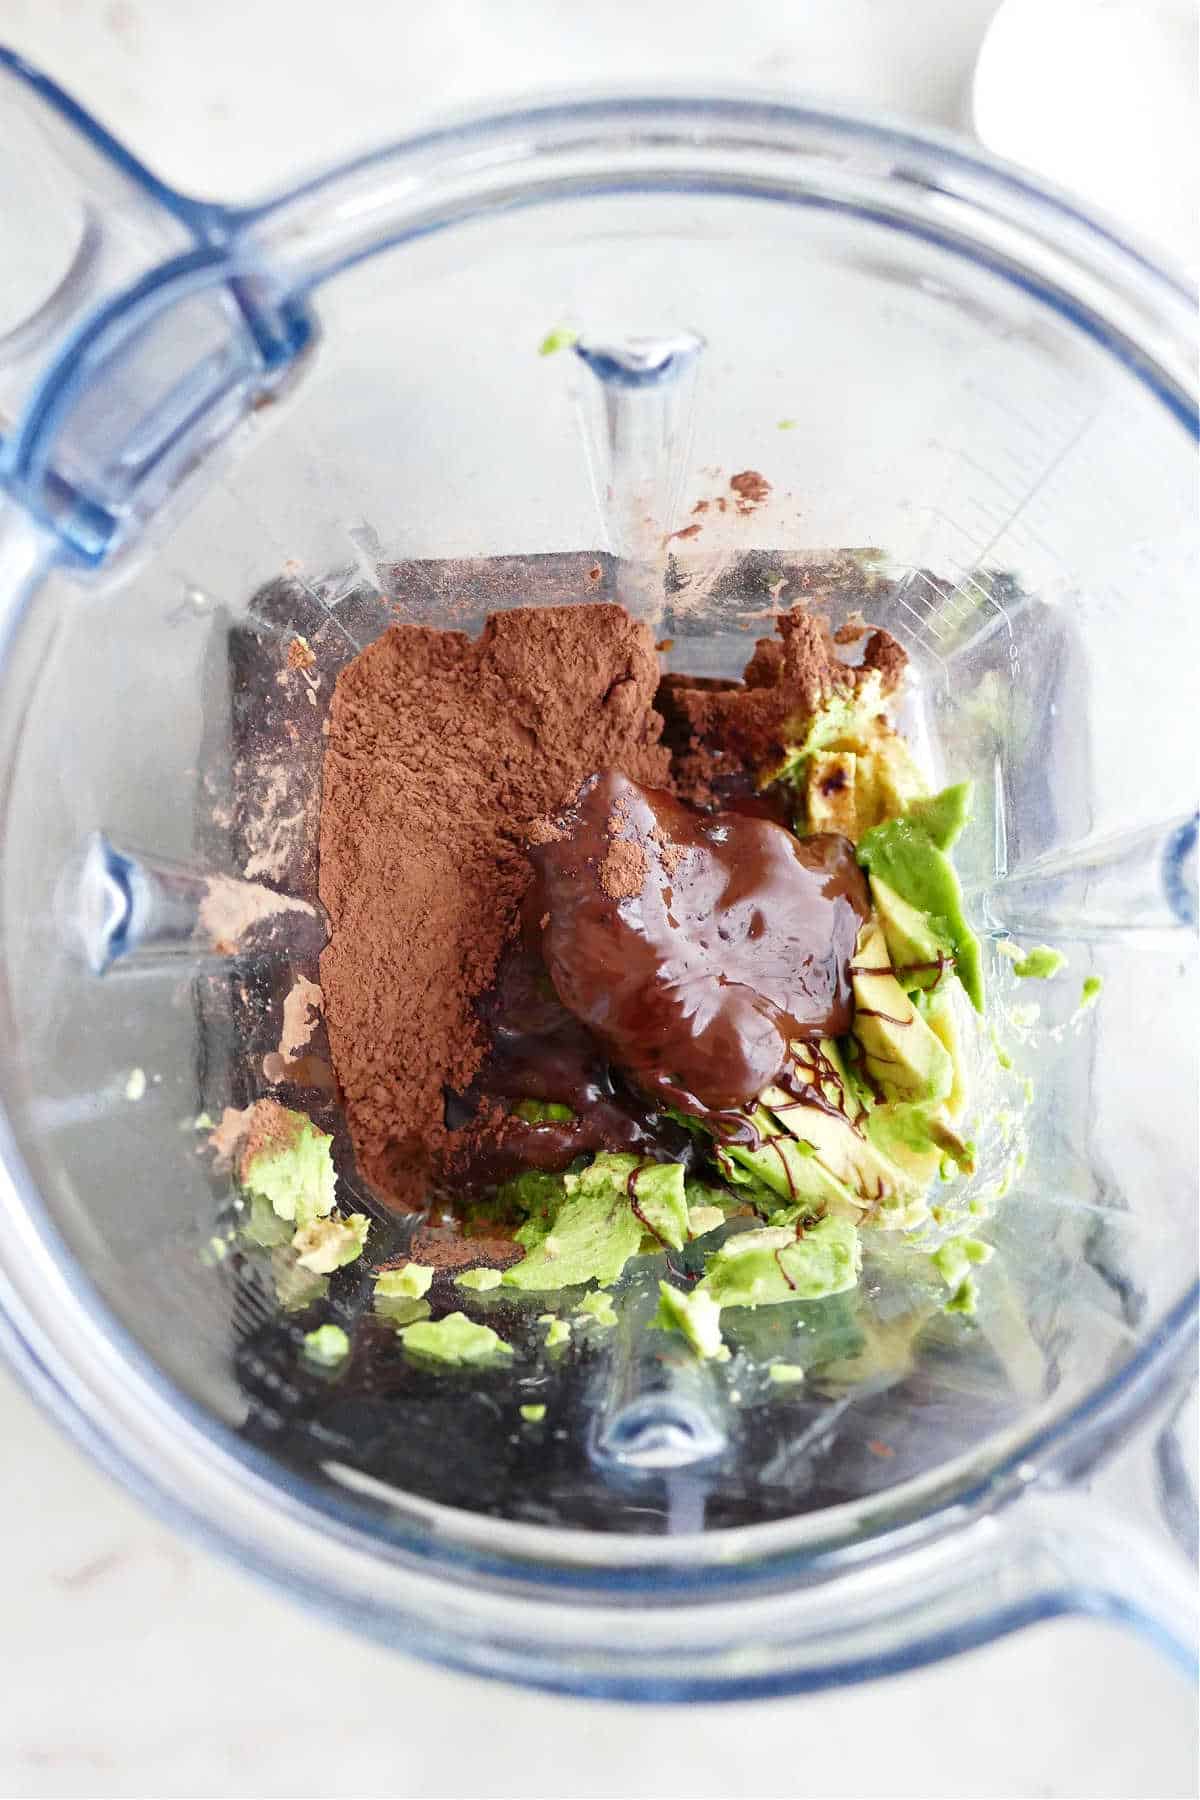 Ingredients for avocado chocolate mousse in blender before blending together